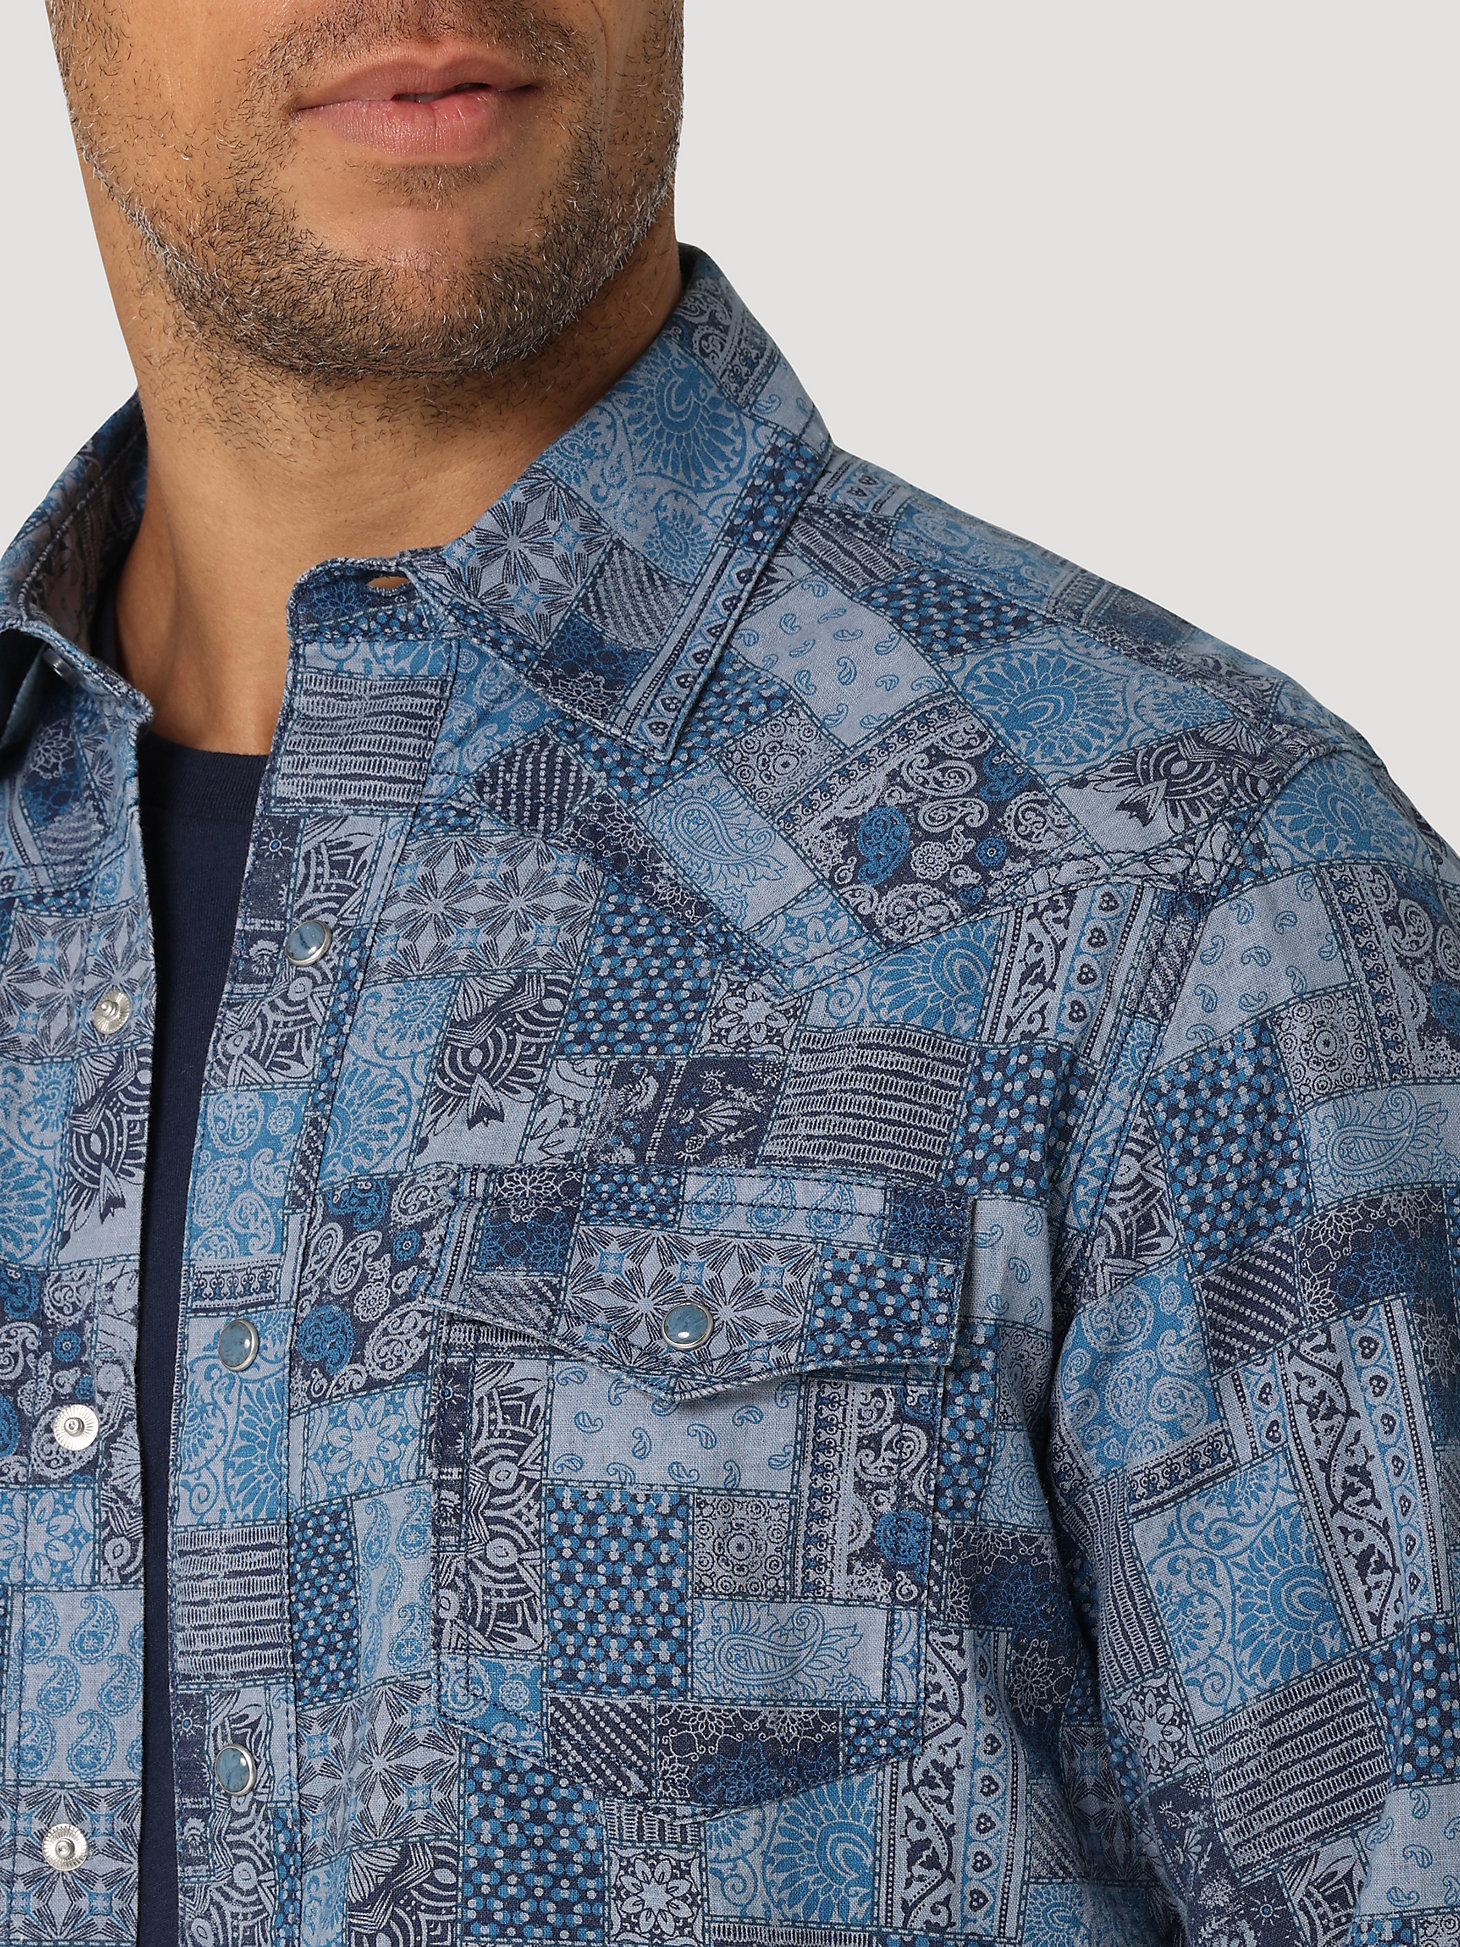 Wrangler Retro® Premium Patchwork Western Snap Shirt in Blue Patches alternative view 2